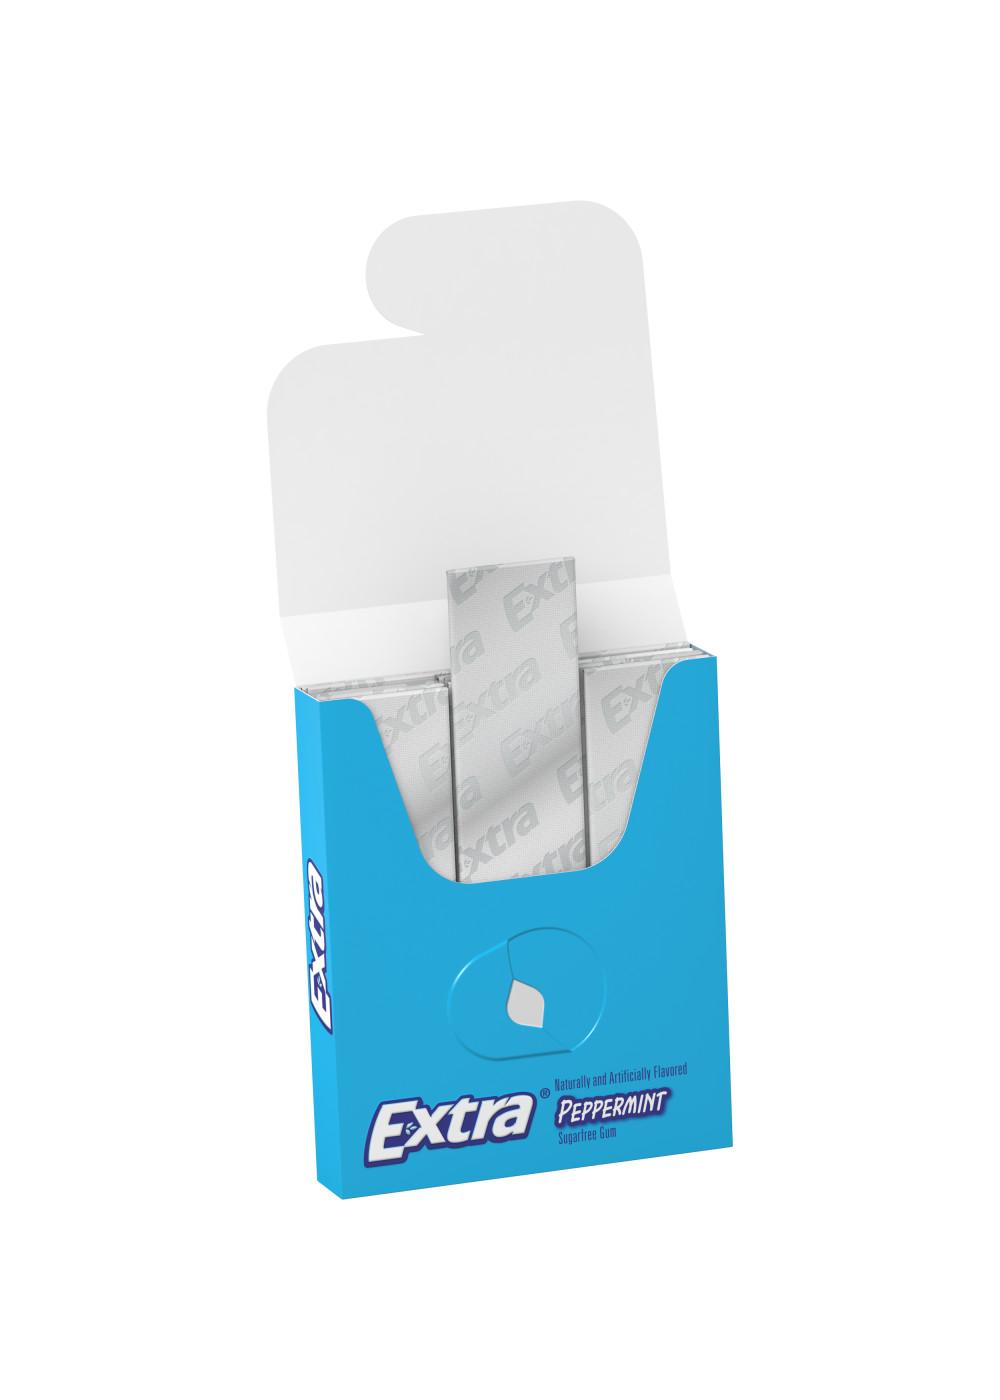 Extra Peppermint Sugar Free Chewing Gum; image 3 of 6